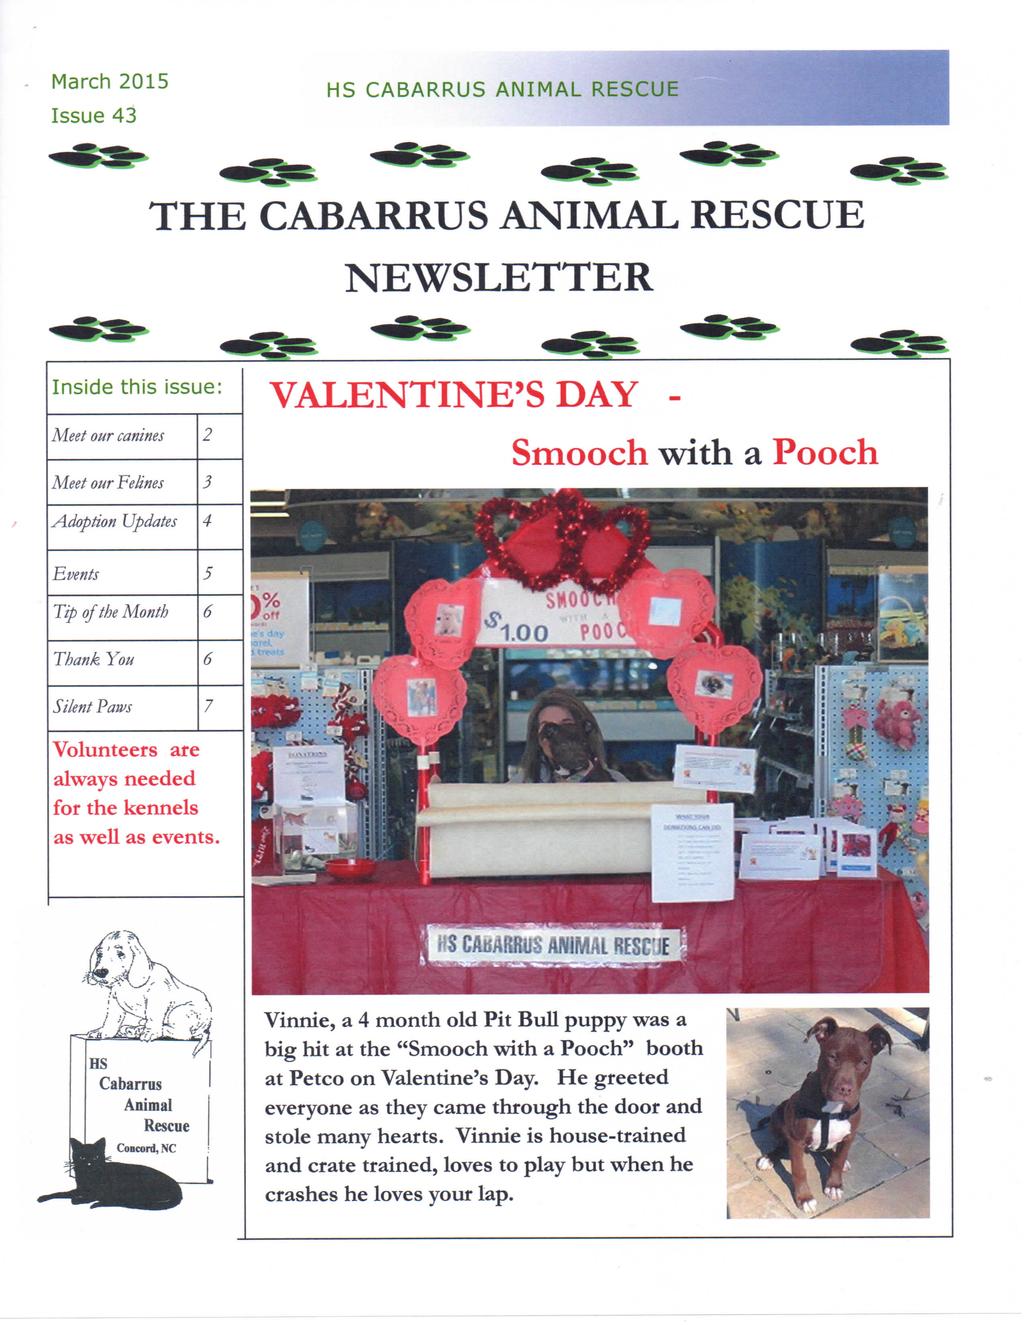 March 2015 Issue 43 HS CABARRUS ANIMAL RESCUE 1 THE CABARRUS ANIMAL RESCUE NEWSLETTER Inside this issue: Meet our canines 2 Meet our Felines 3 VALENTINE'S DAY - Smooch with a Pooch Adoption Updates 4